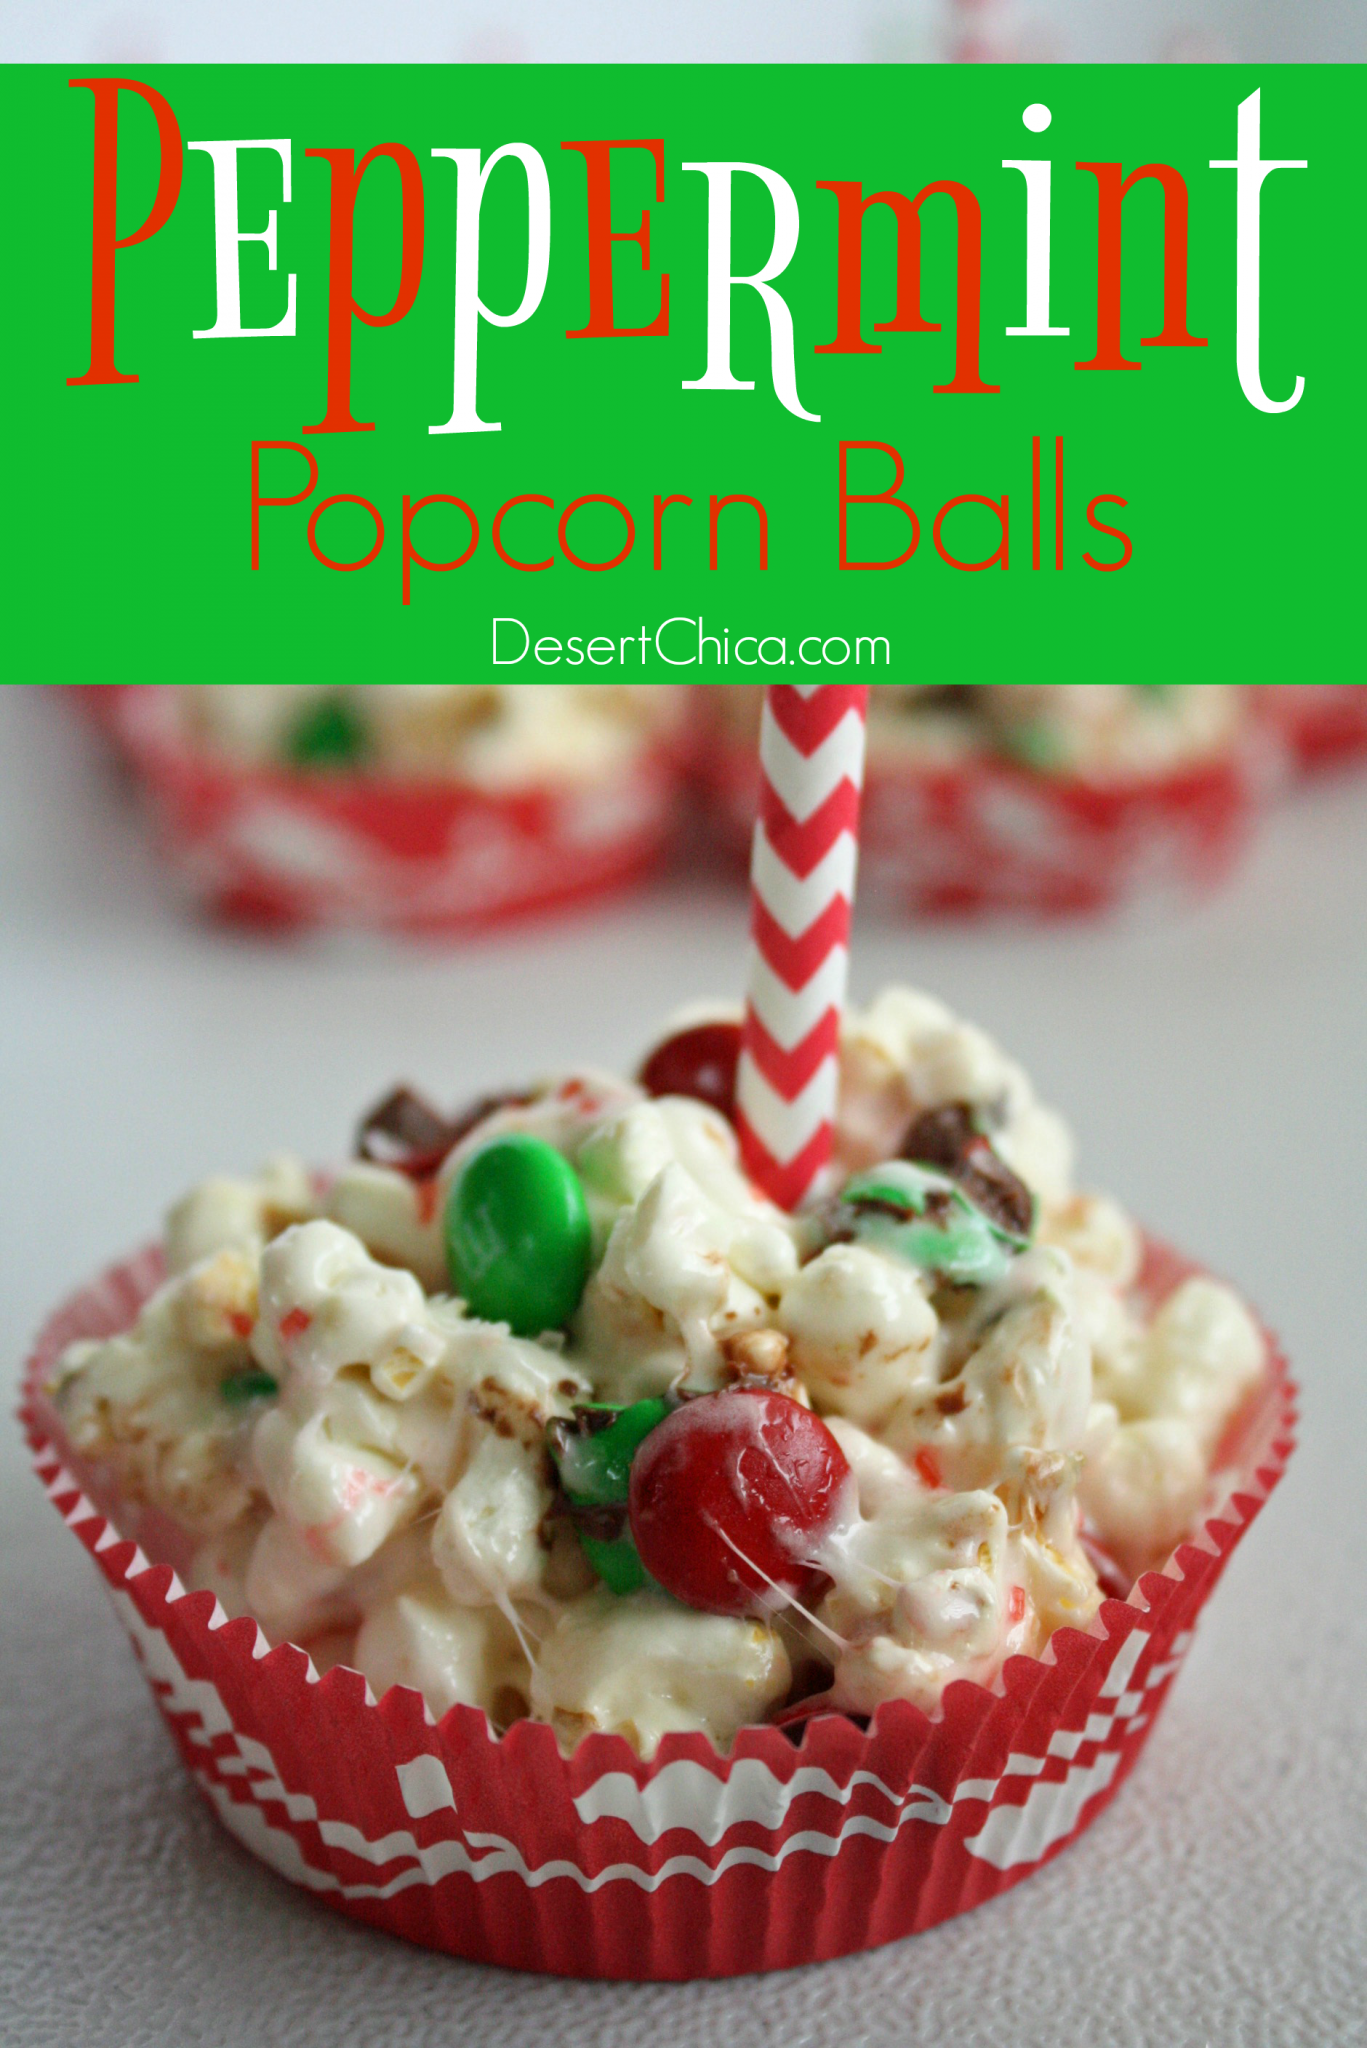 Celebrate all things peppermint with this fun recipe. The kiddos will love helping you make and decorate peppermint popcorn balls.